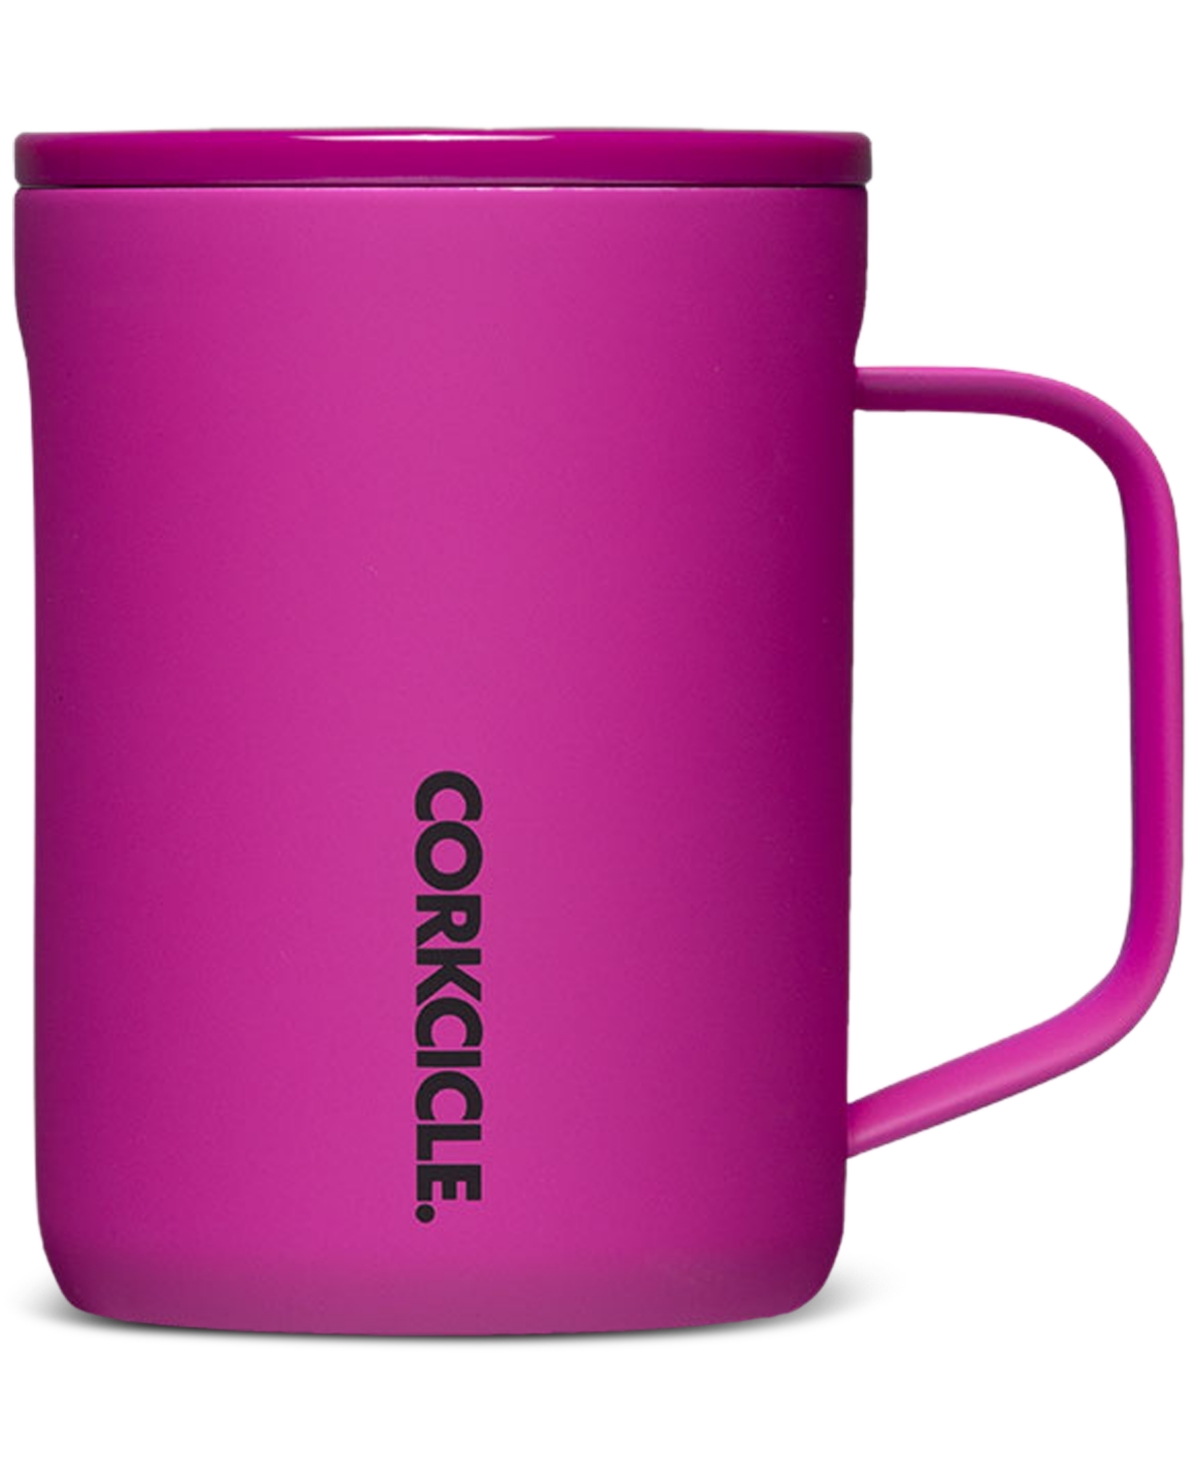 Corkcicle Berry Punch 16-oz. Stainless Steel Insulated Mug